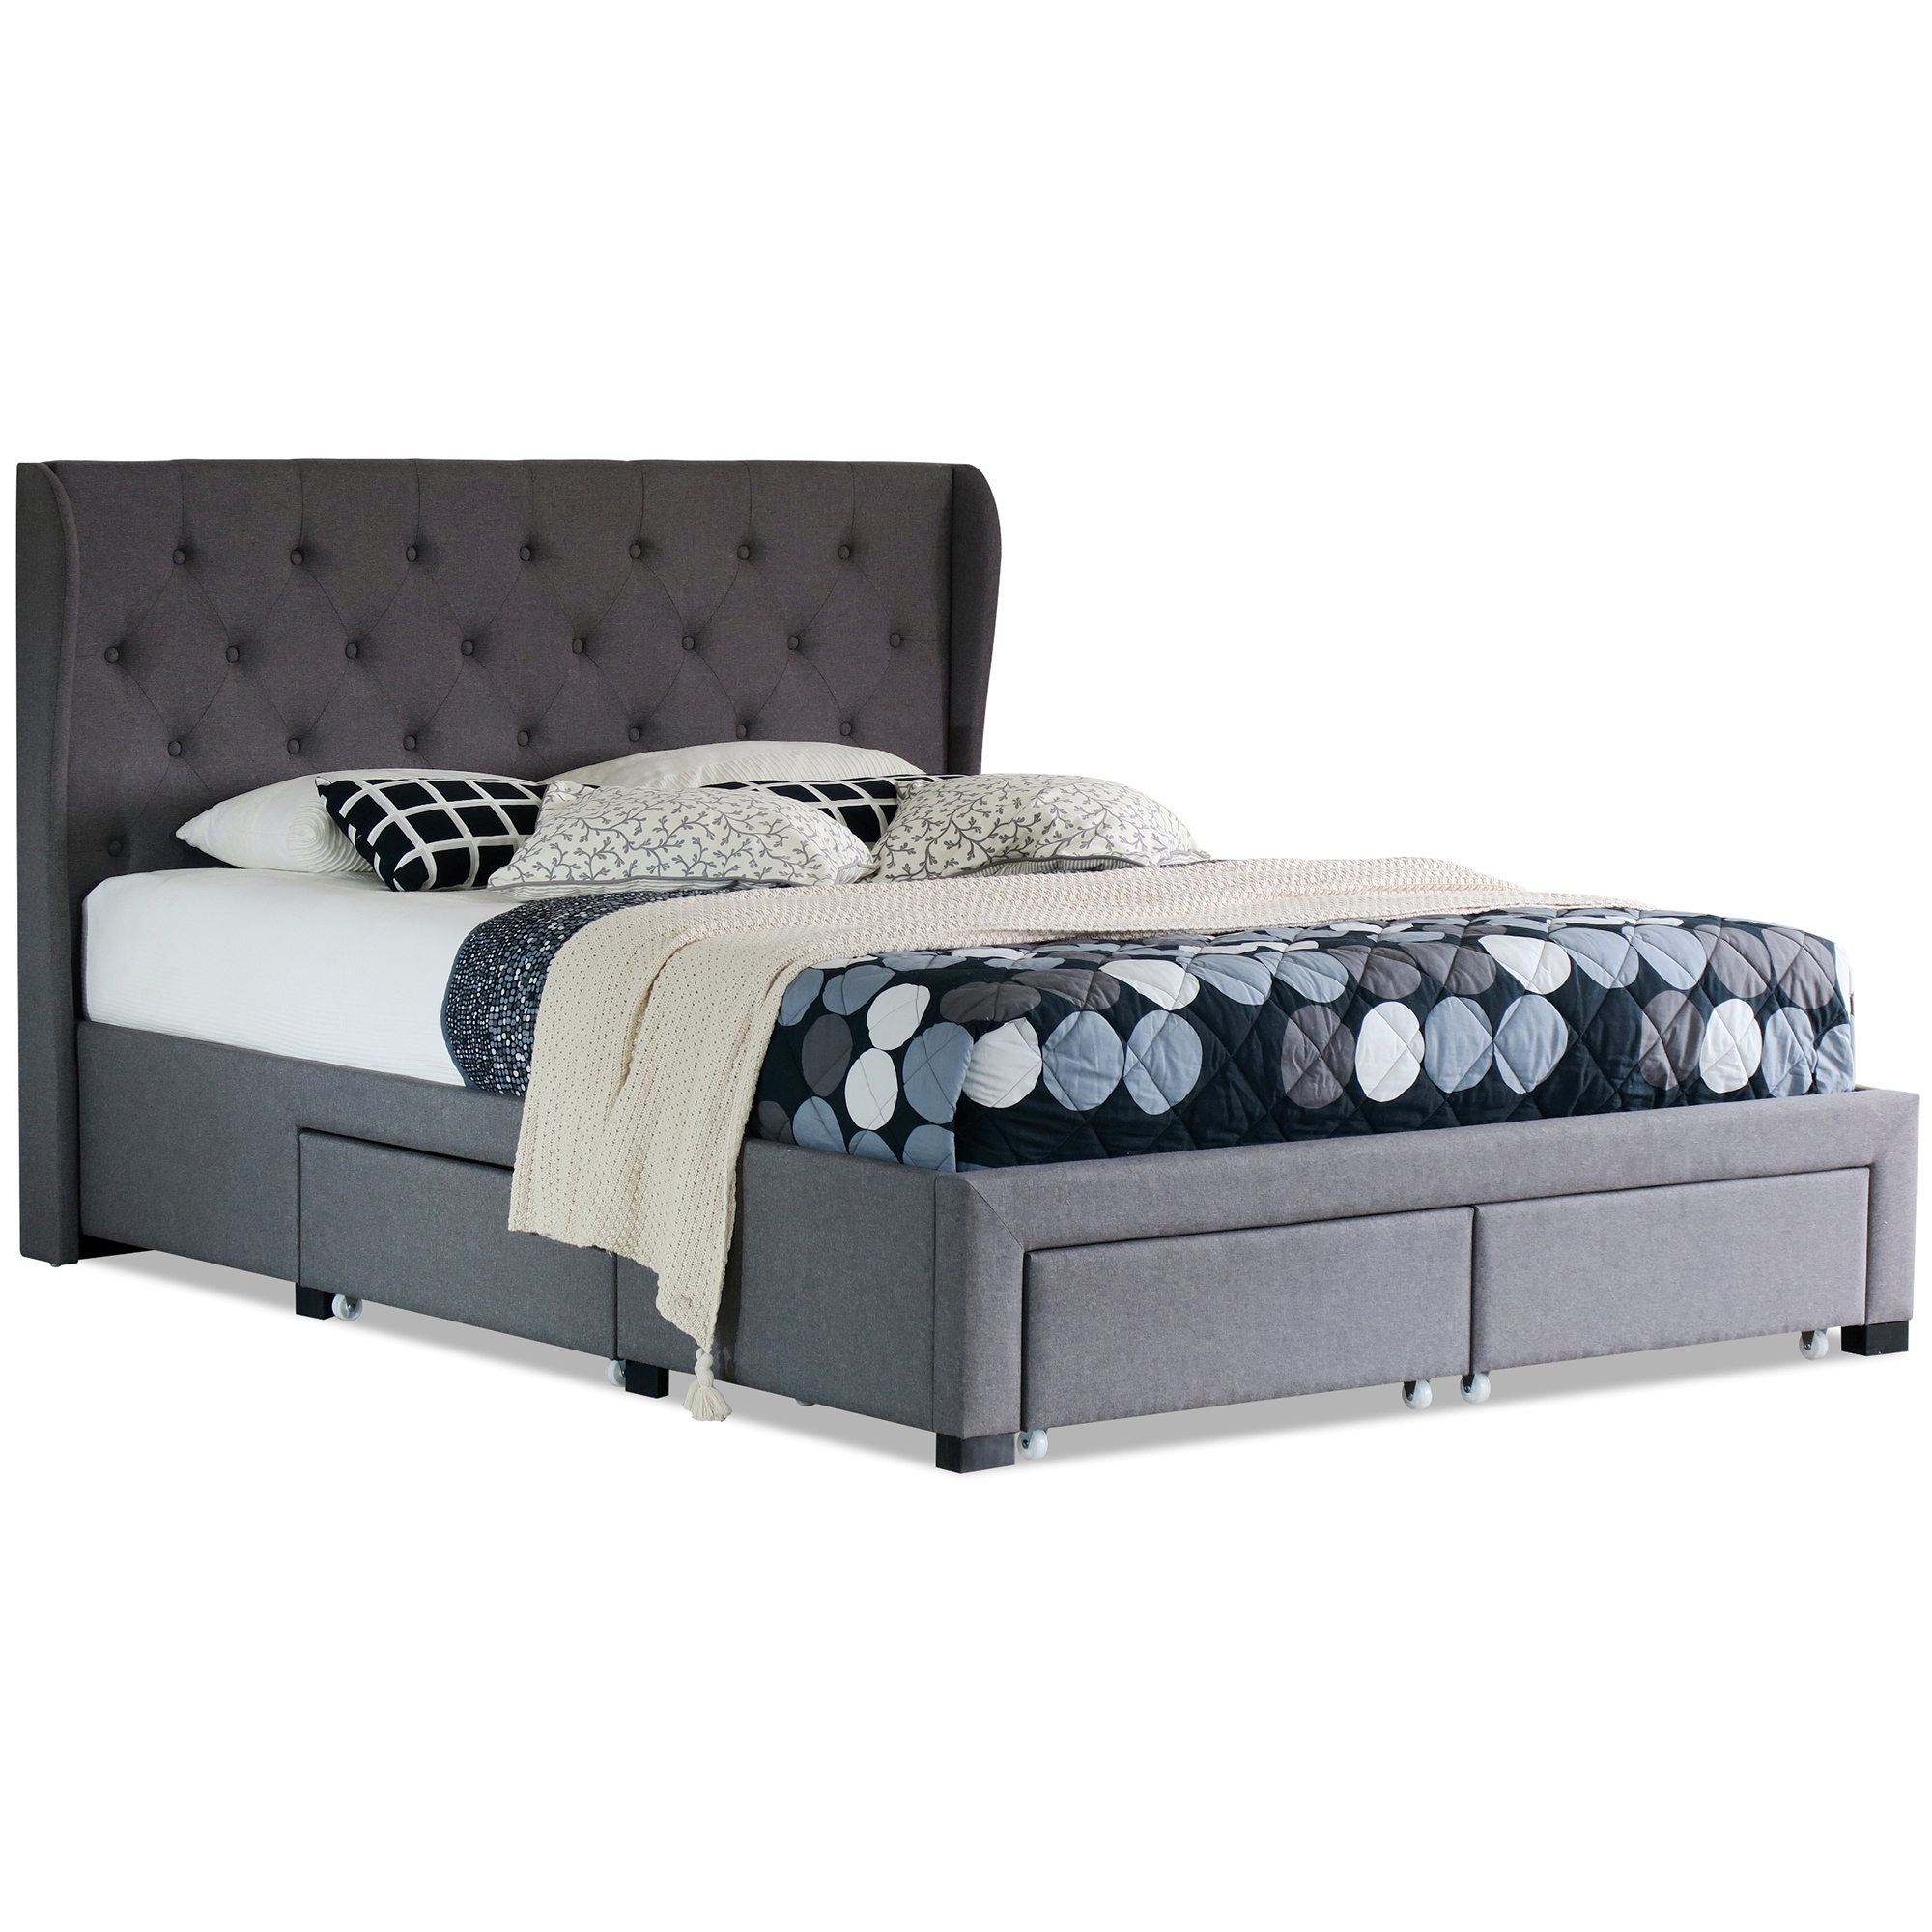 Rawson Co Grey Harlow Upholstered Bed, King Bed Frames With Storage Australia